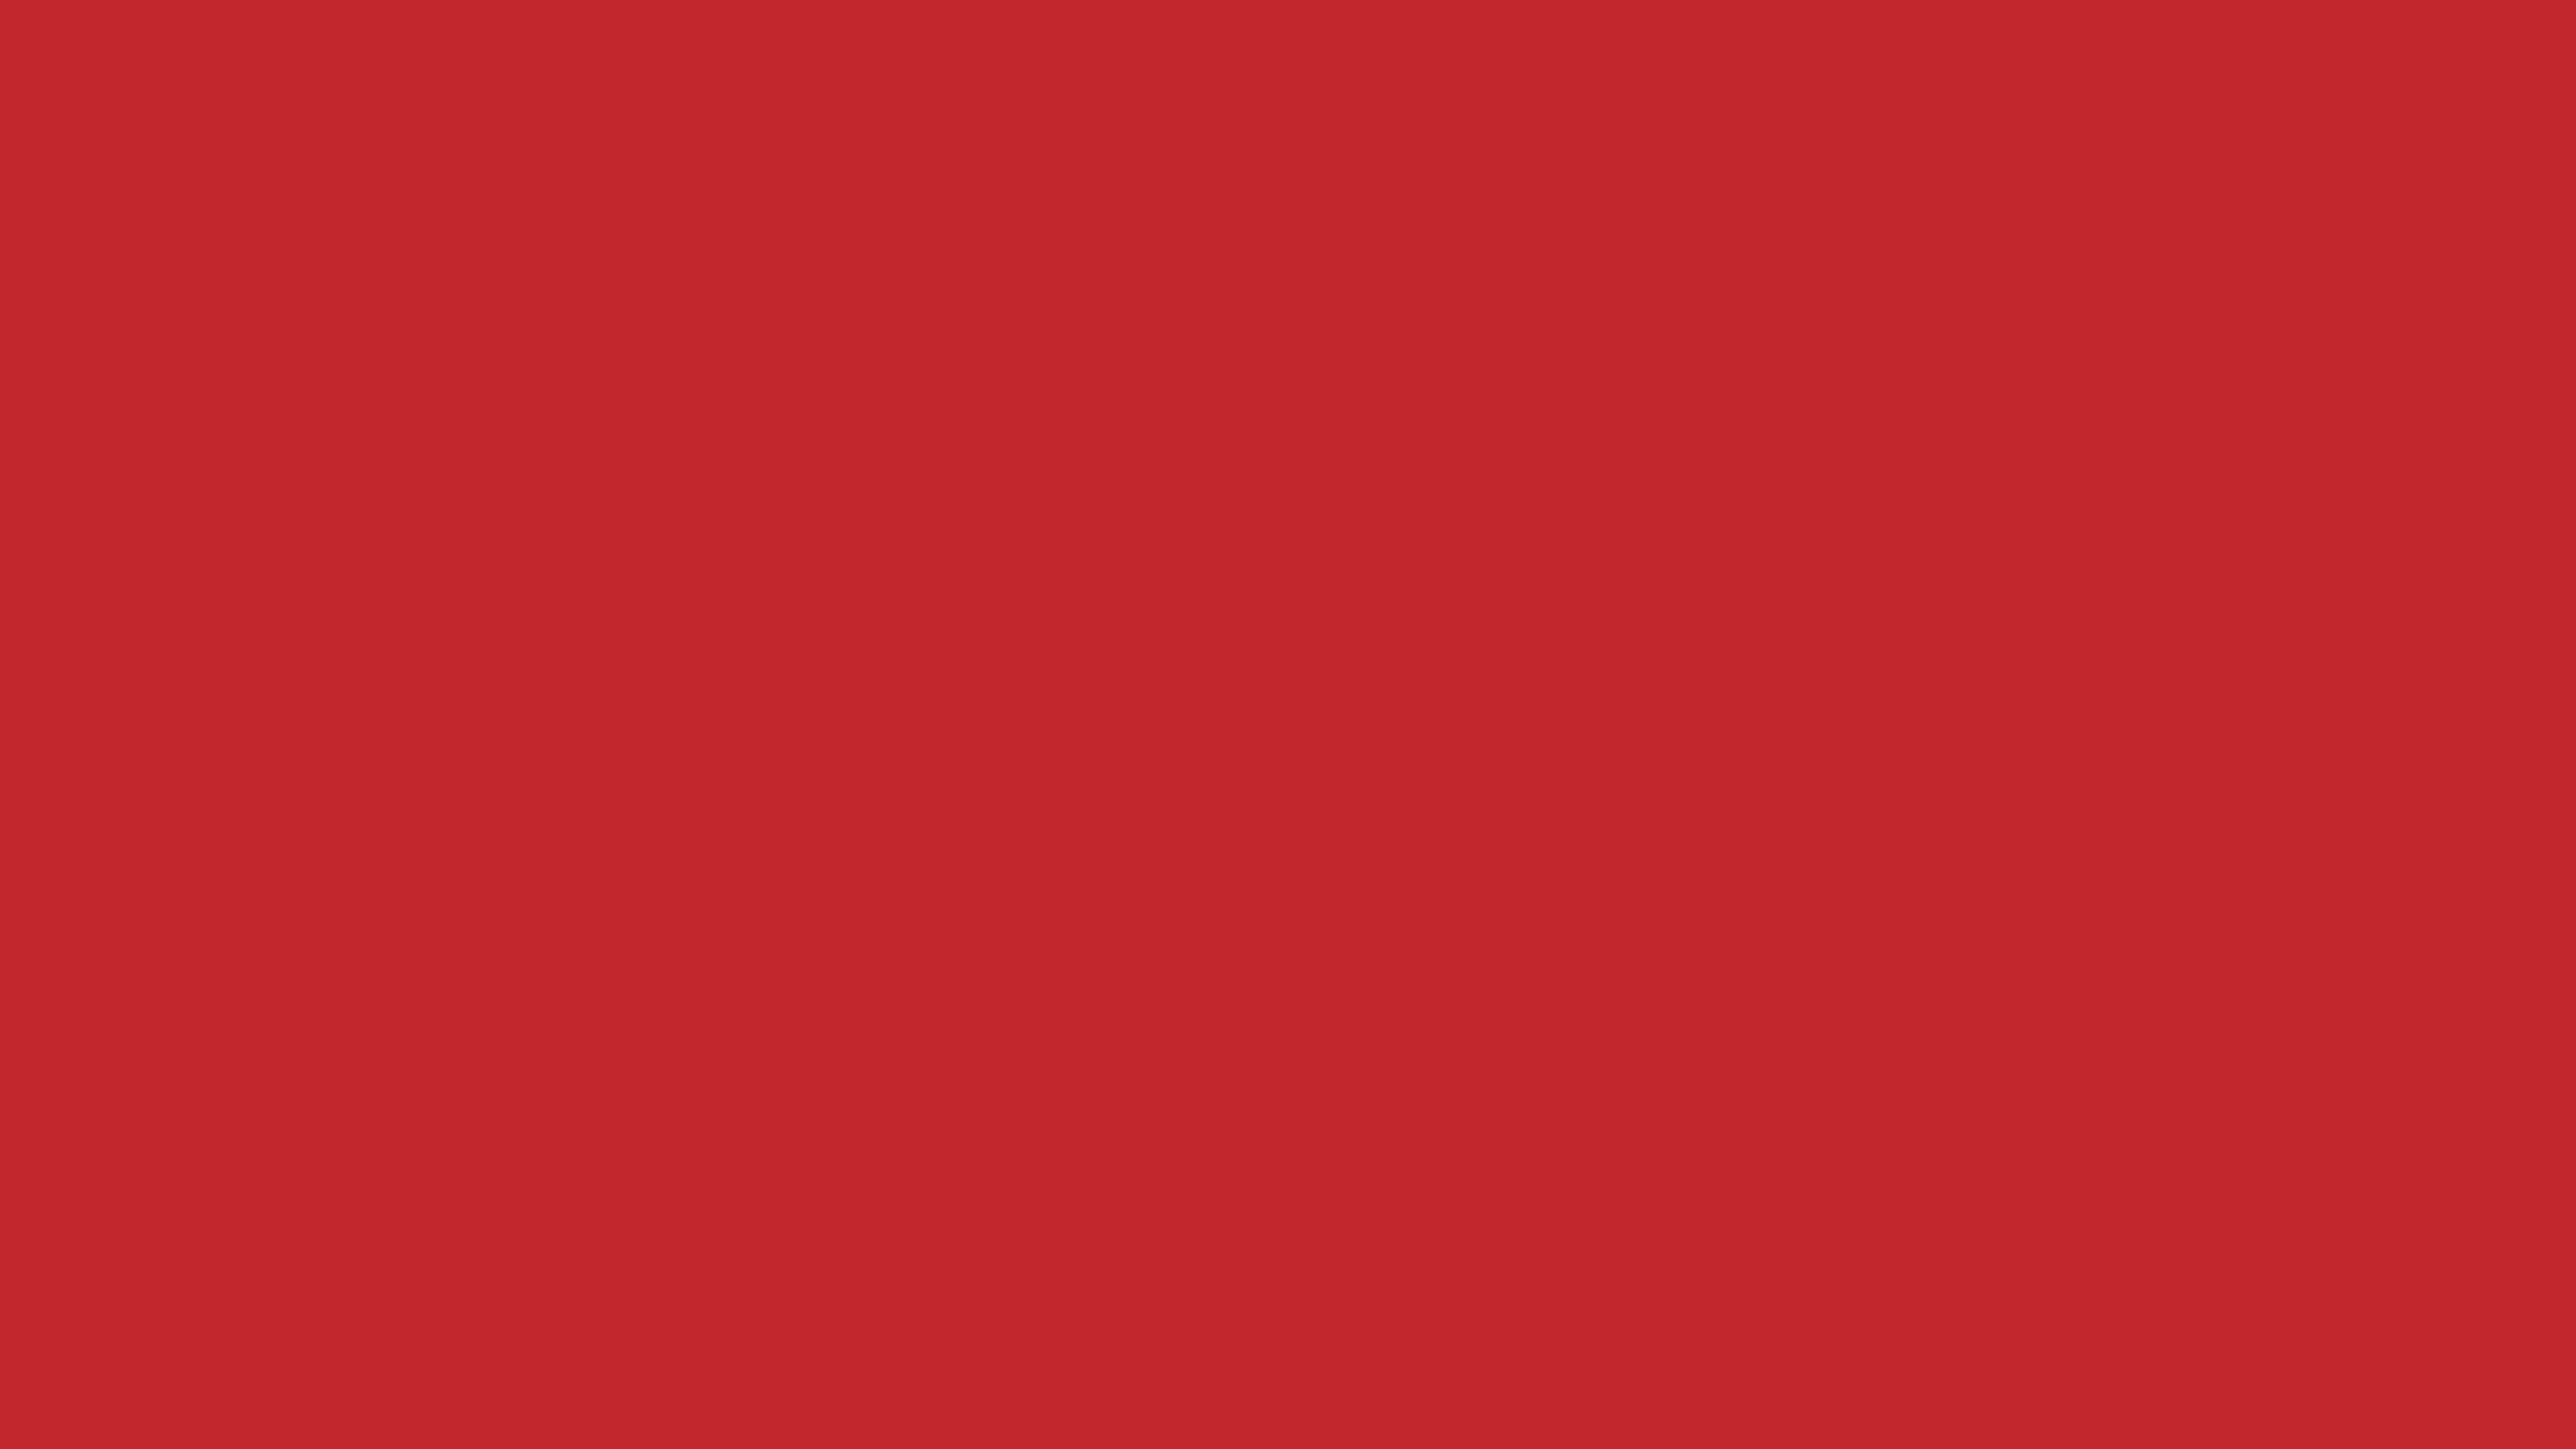 Plain solid red background